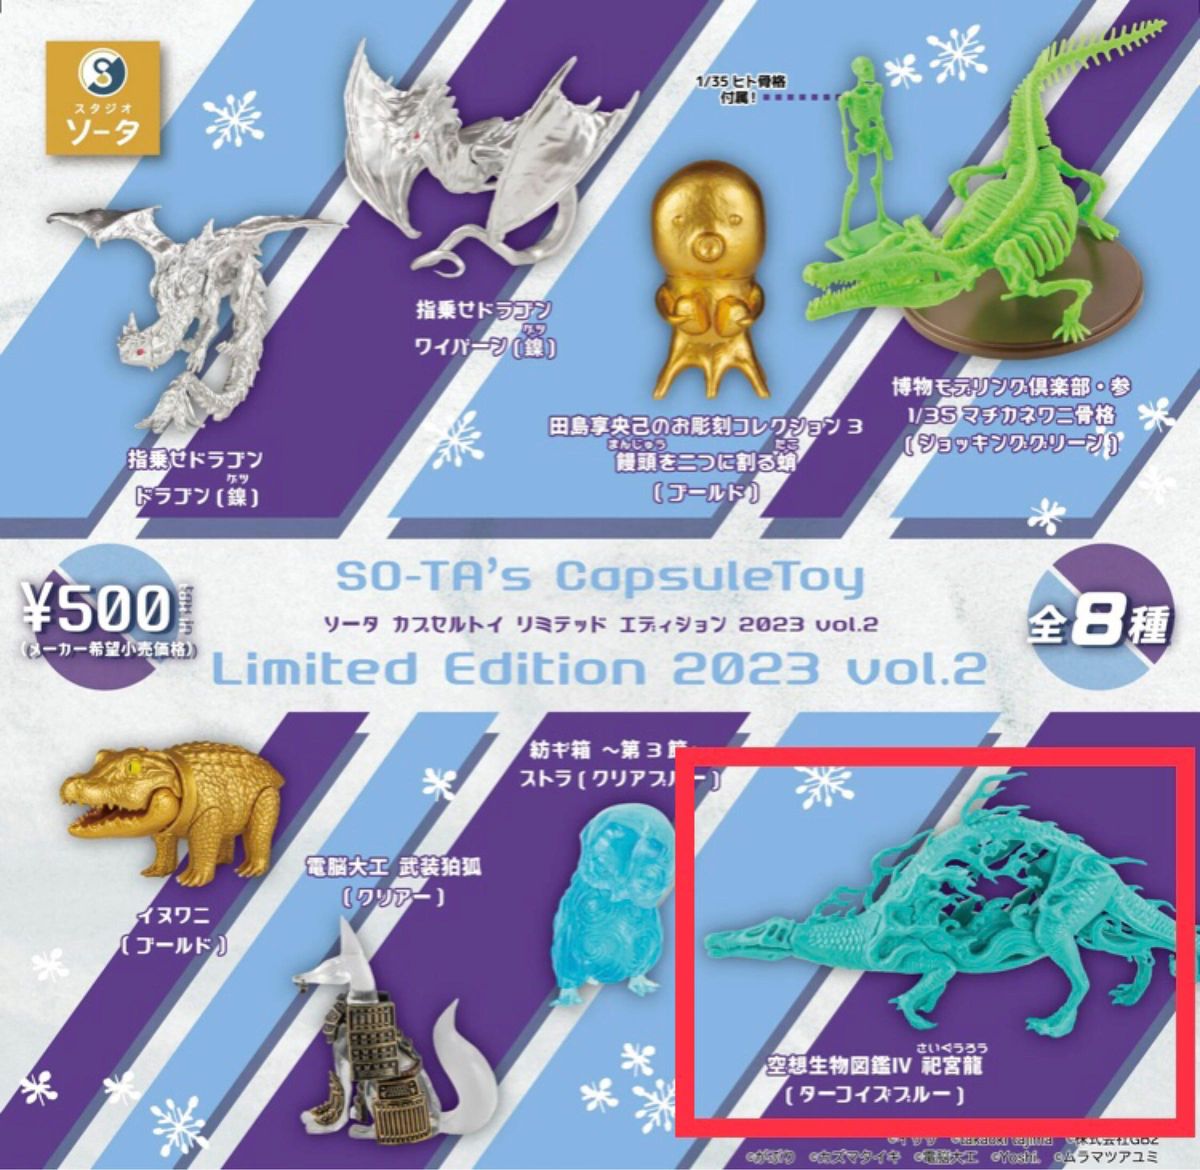 SO-TA’s CapsuleToy Limited Edition 2023 空想生物図鑑Ⅳ 祀宮龍 ターコイズブルー 限定